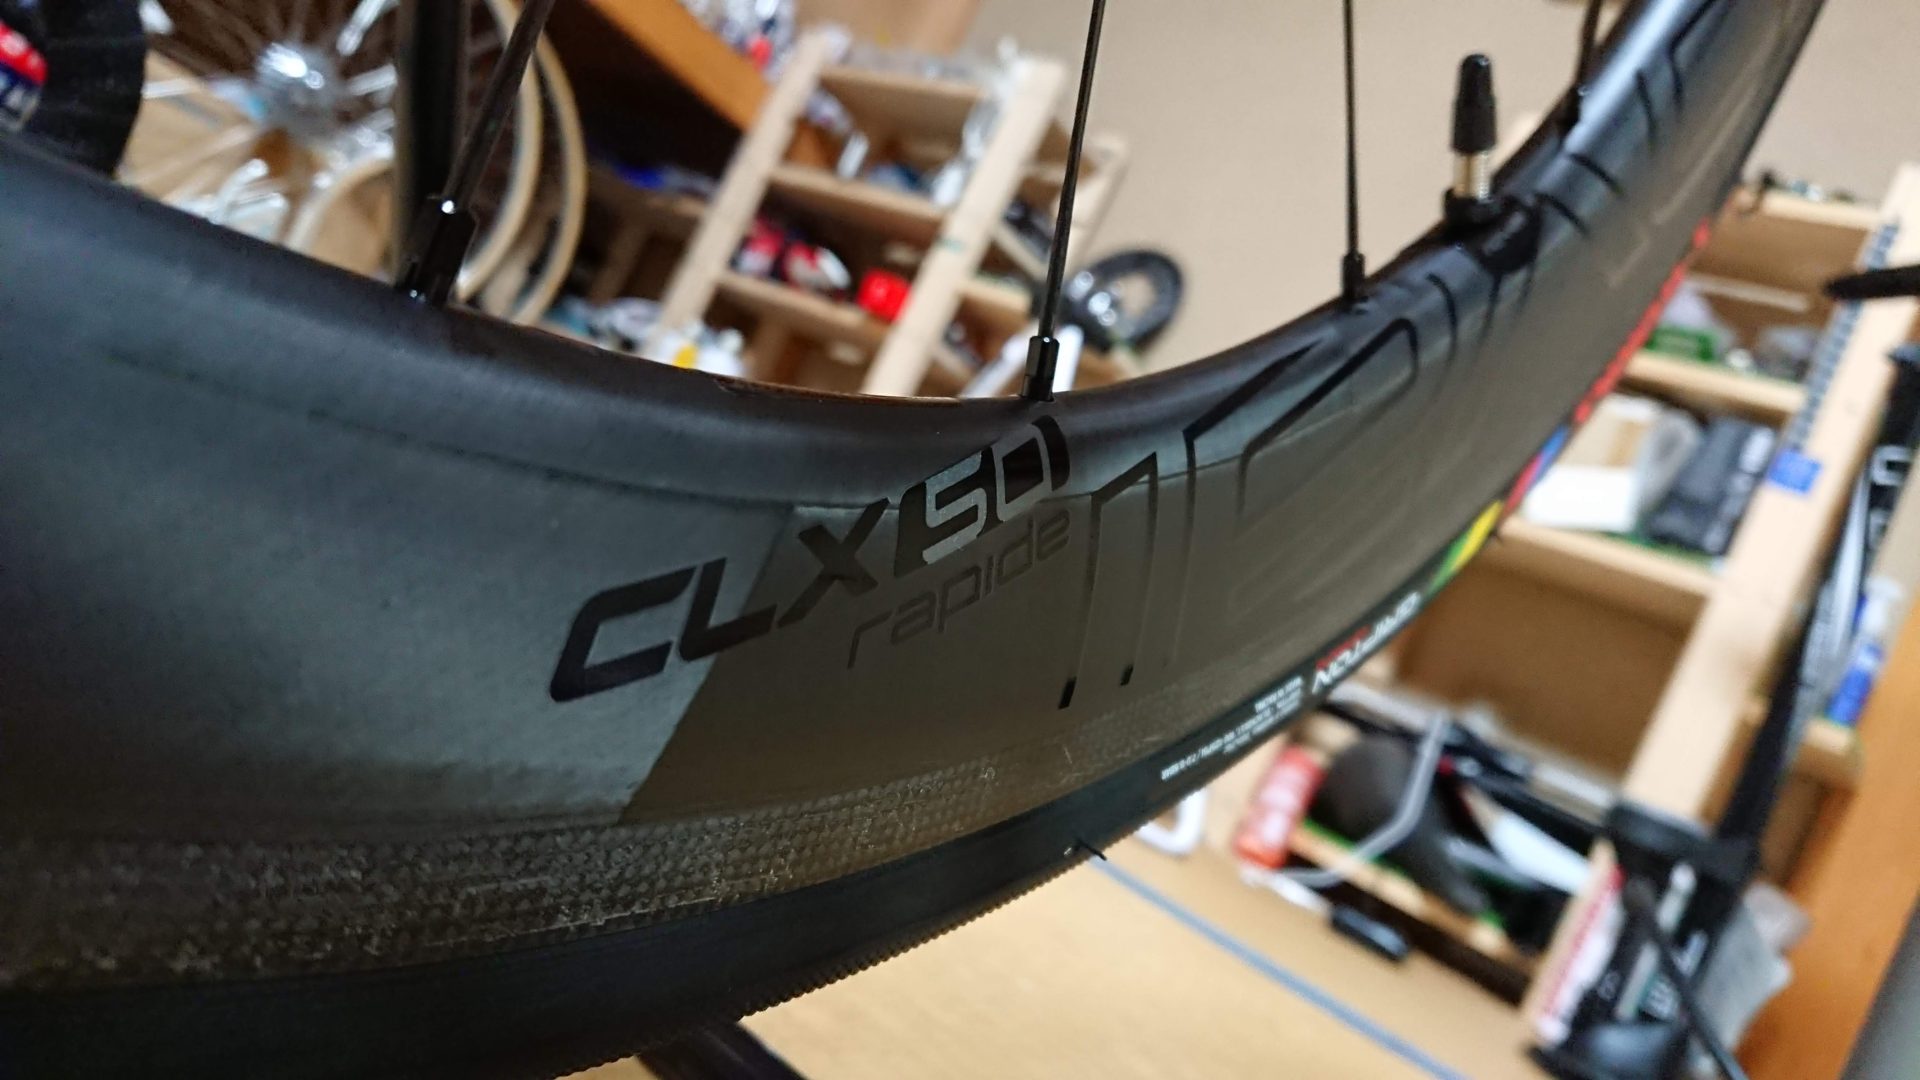 SPECIALIZED ROVAL CLX50は何がそんなに良いのか？（その１ 